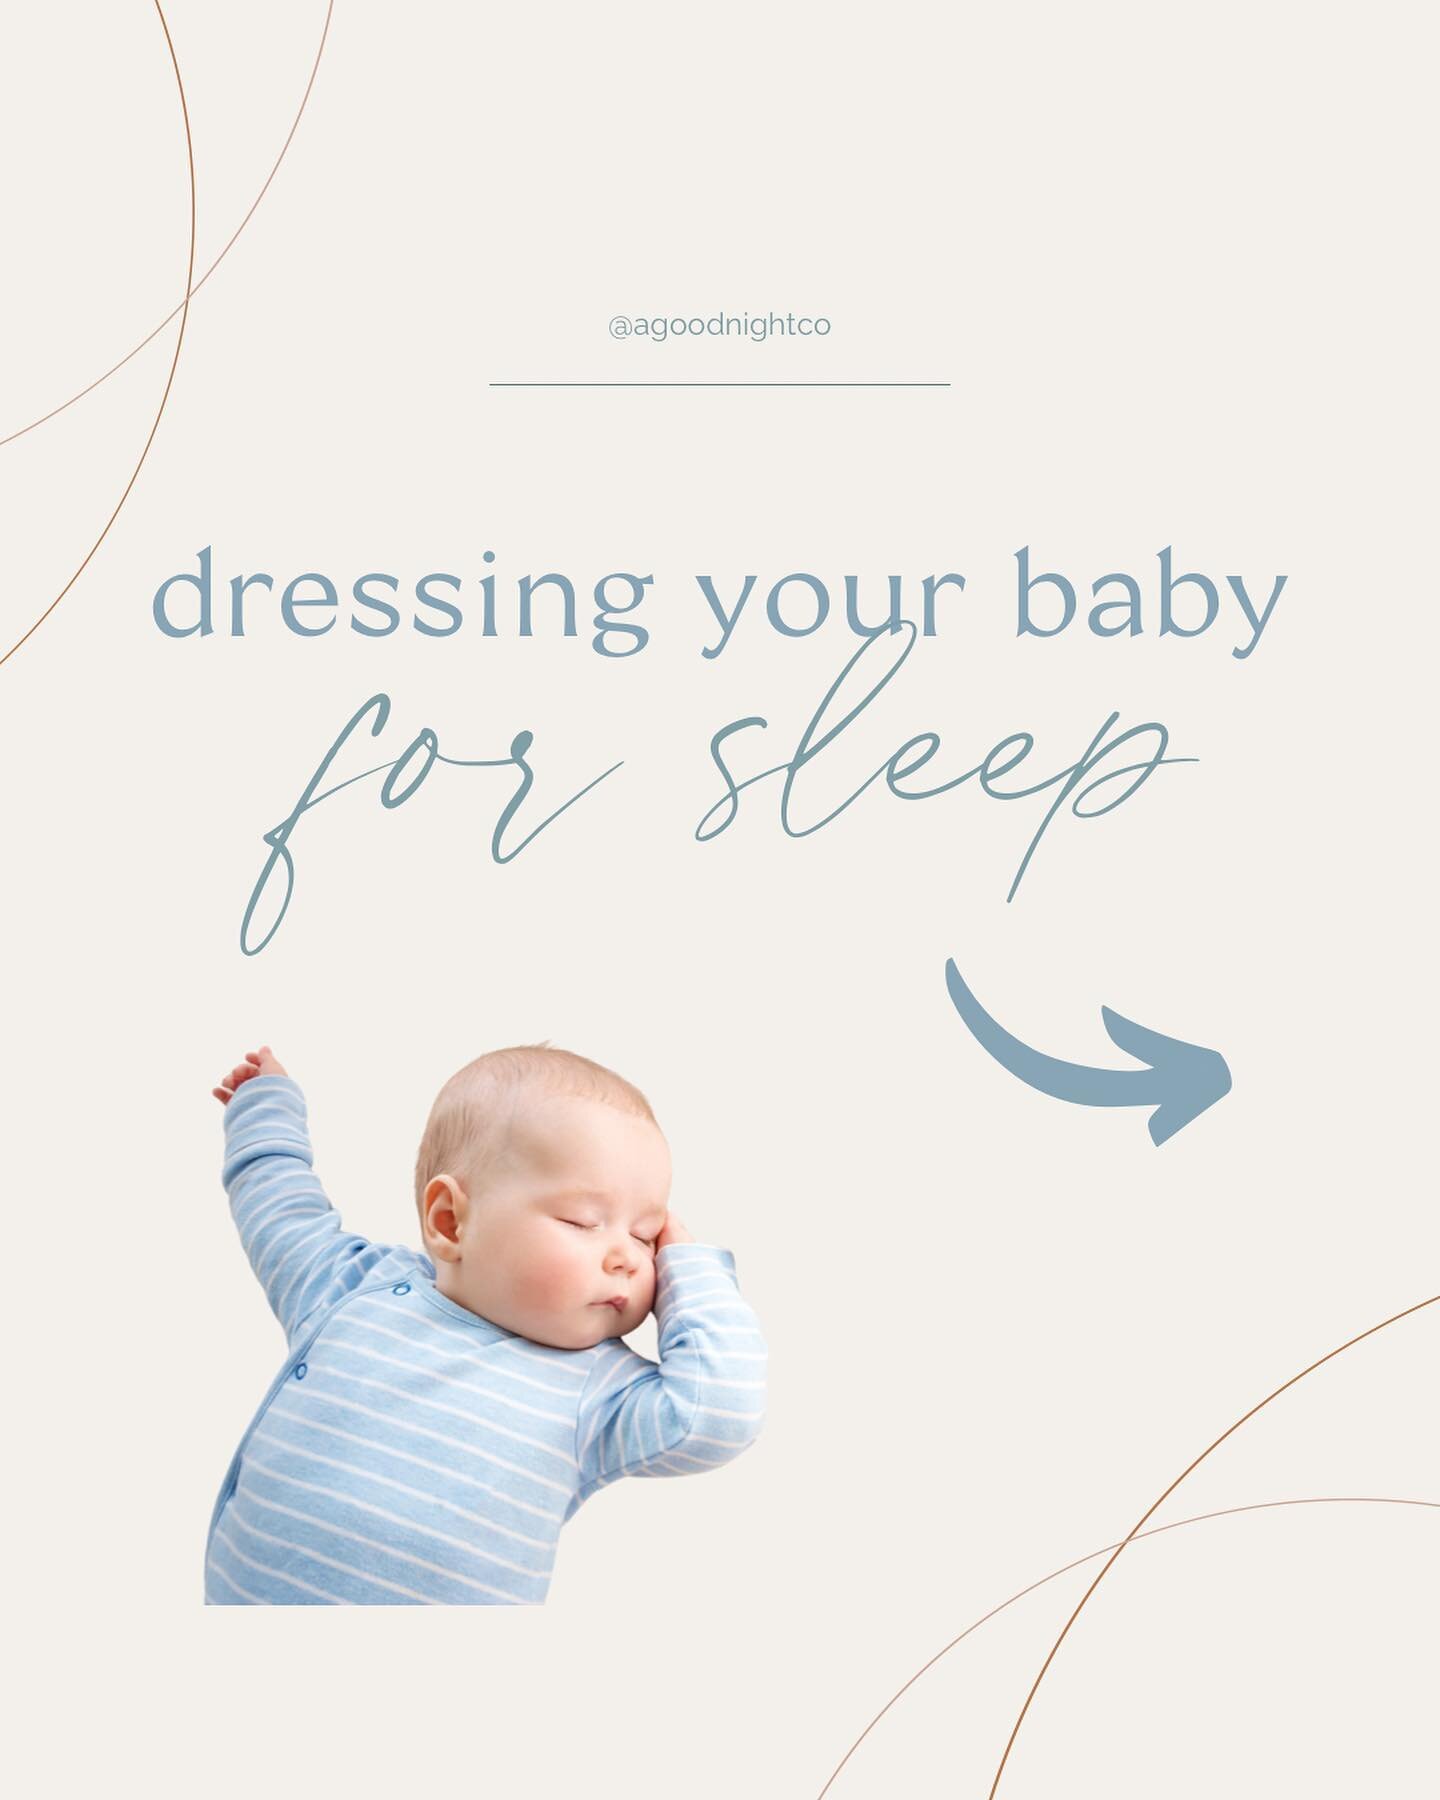 Are they too hot? Too cold? How many layers should they be wearing? It can be so hard to know how to dress your baby for sleep! Swipe through for my top tips and considerations when dressing your babe for sleep time!

Editing to add: I missed a slide